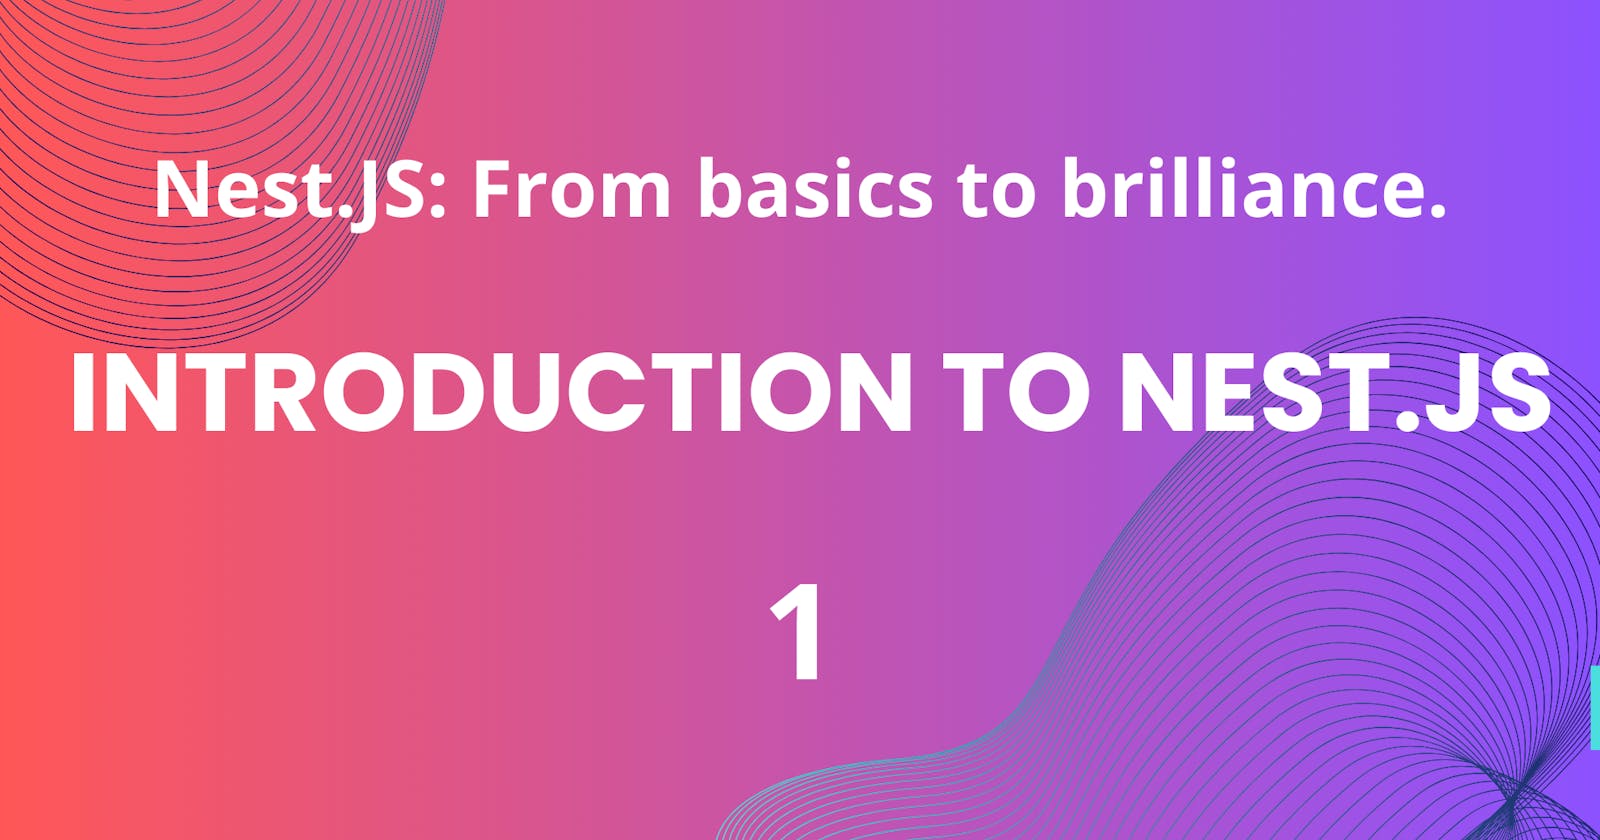 Introduction to Nest.JS.